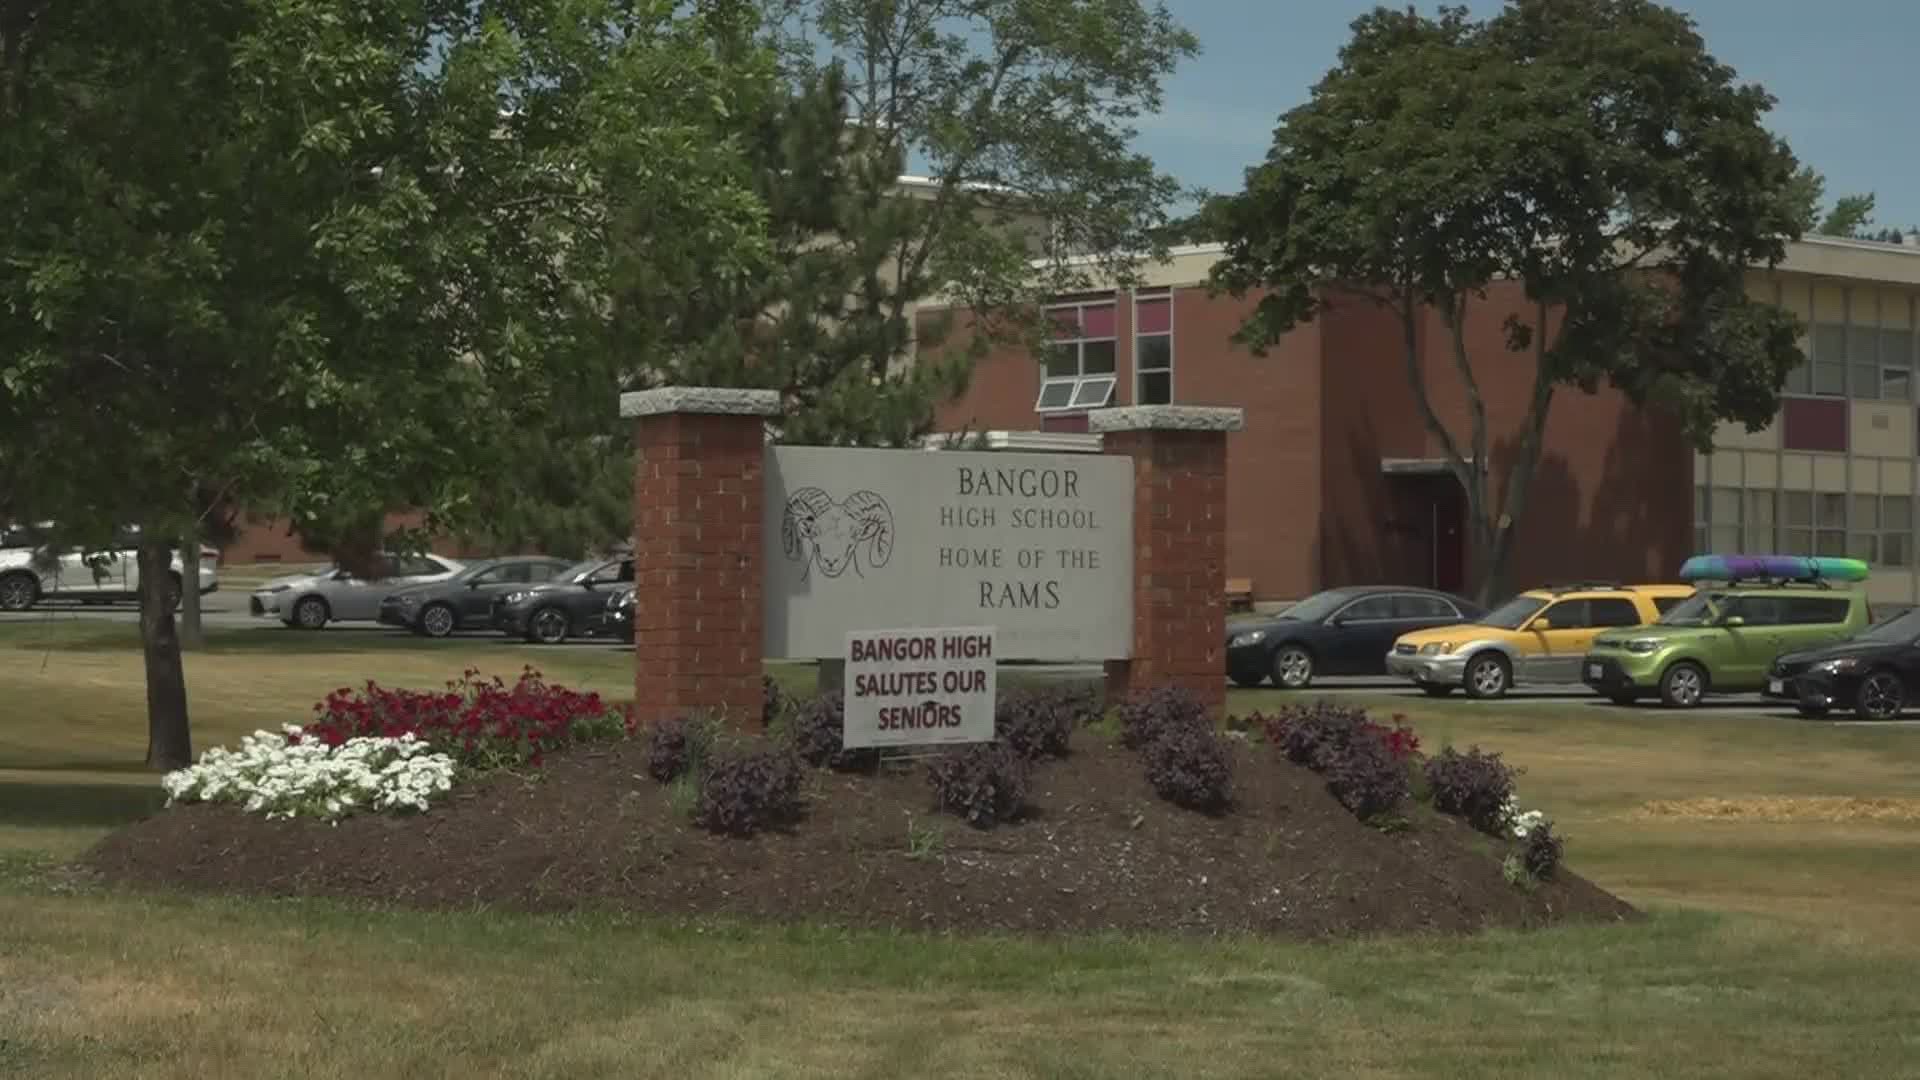 On Tuesday, June 23, the Bangor Daily News published an article in which five Black high school students detailed racist and discriminatory experiences.